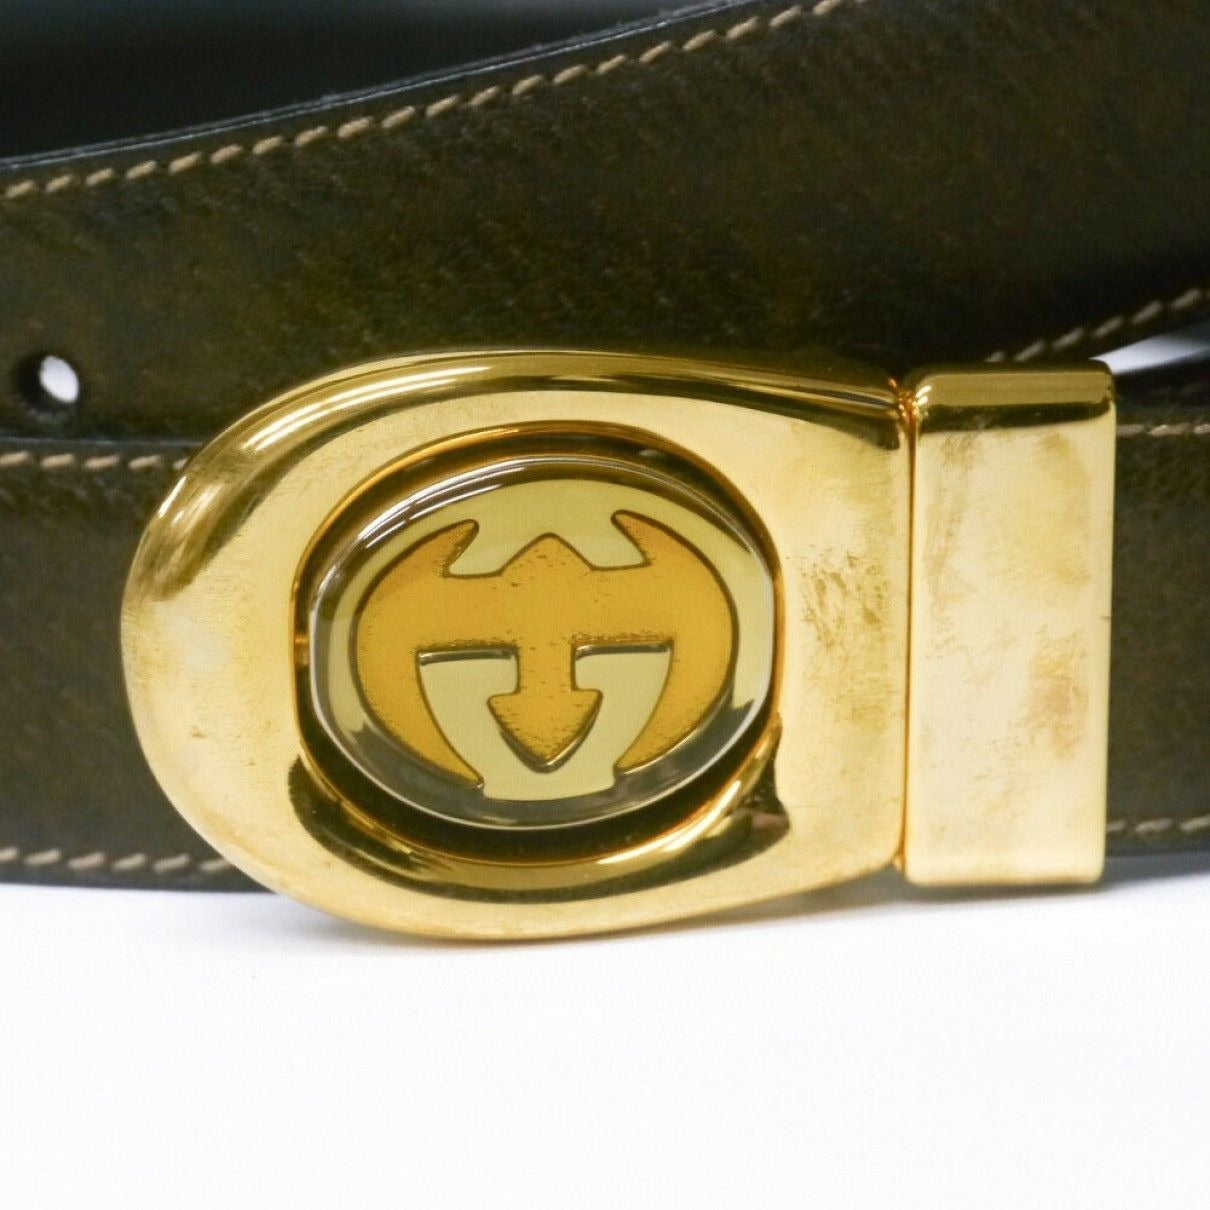 Vintage, Gucci, 44" long x 1.25" wide, brown or black leather, reversible belt in size 40" with a dual sided, two-tone engraved GG buckle